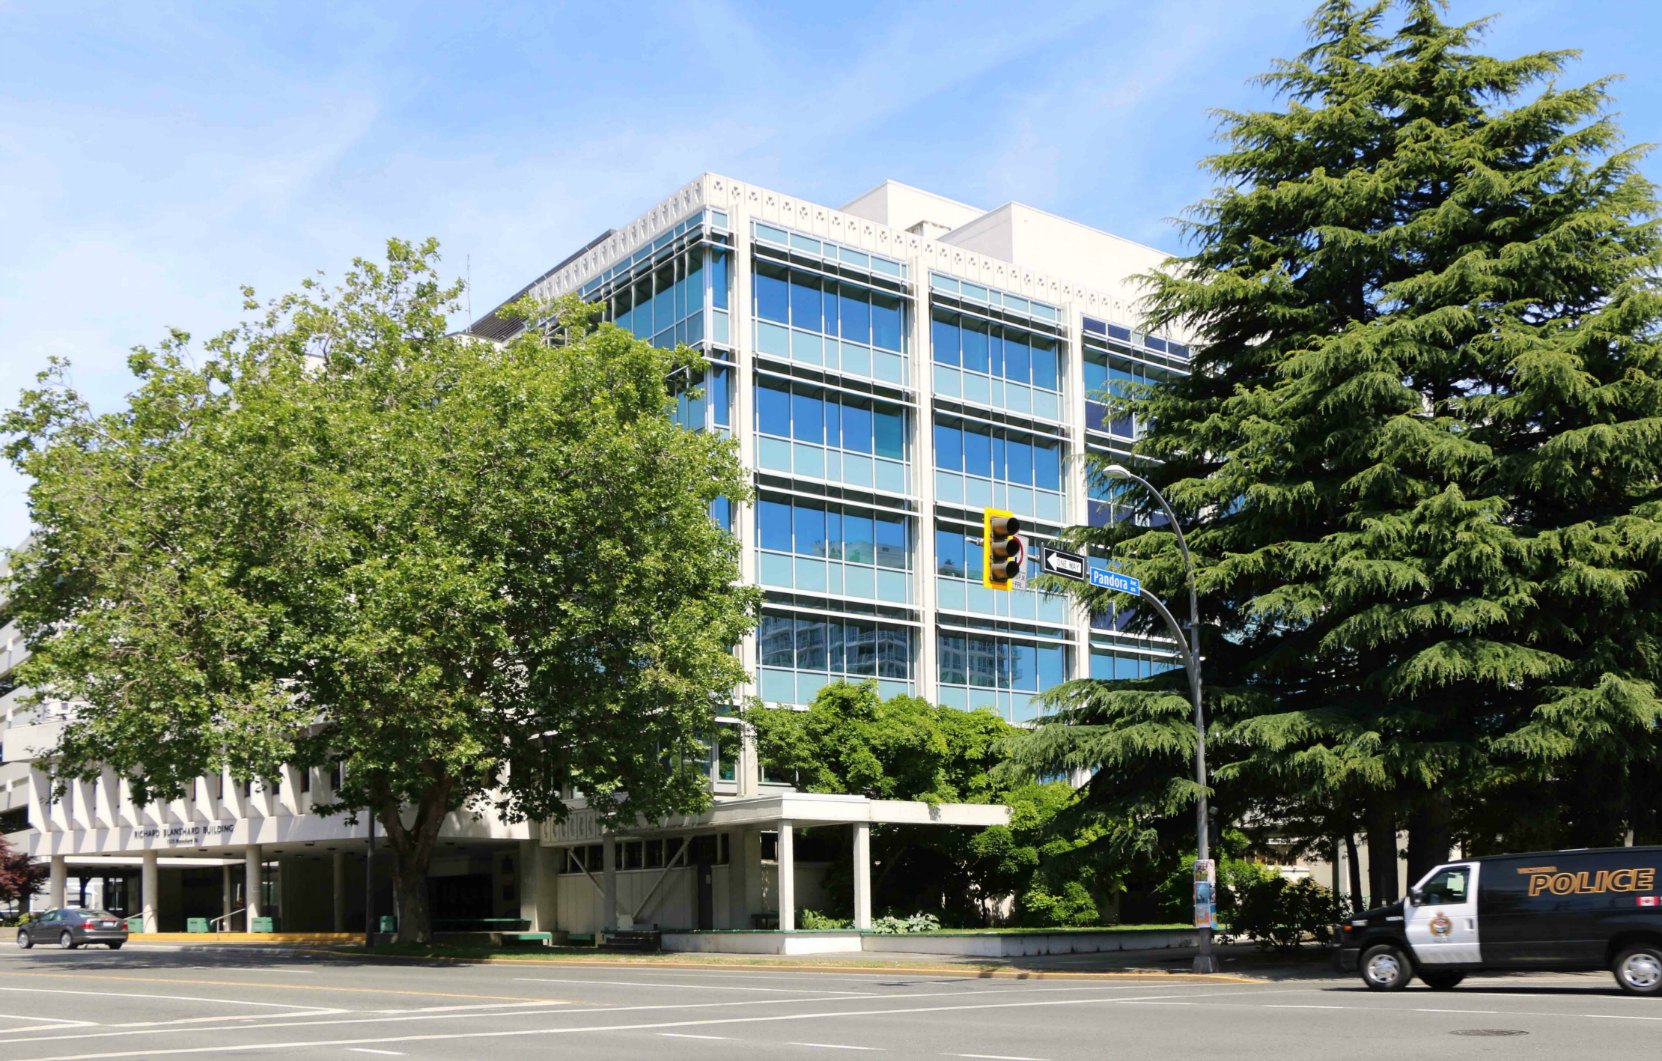 1515 Blanshard Street, built in 1954-1955 for the B.C. Electric Company. Listed on the Canadian Register of Historic Places.